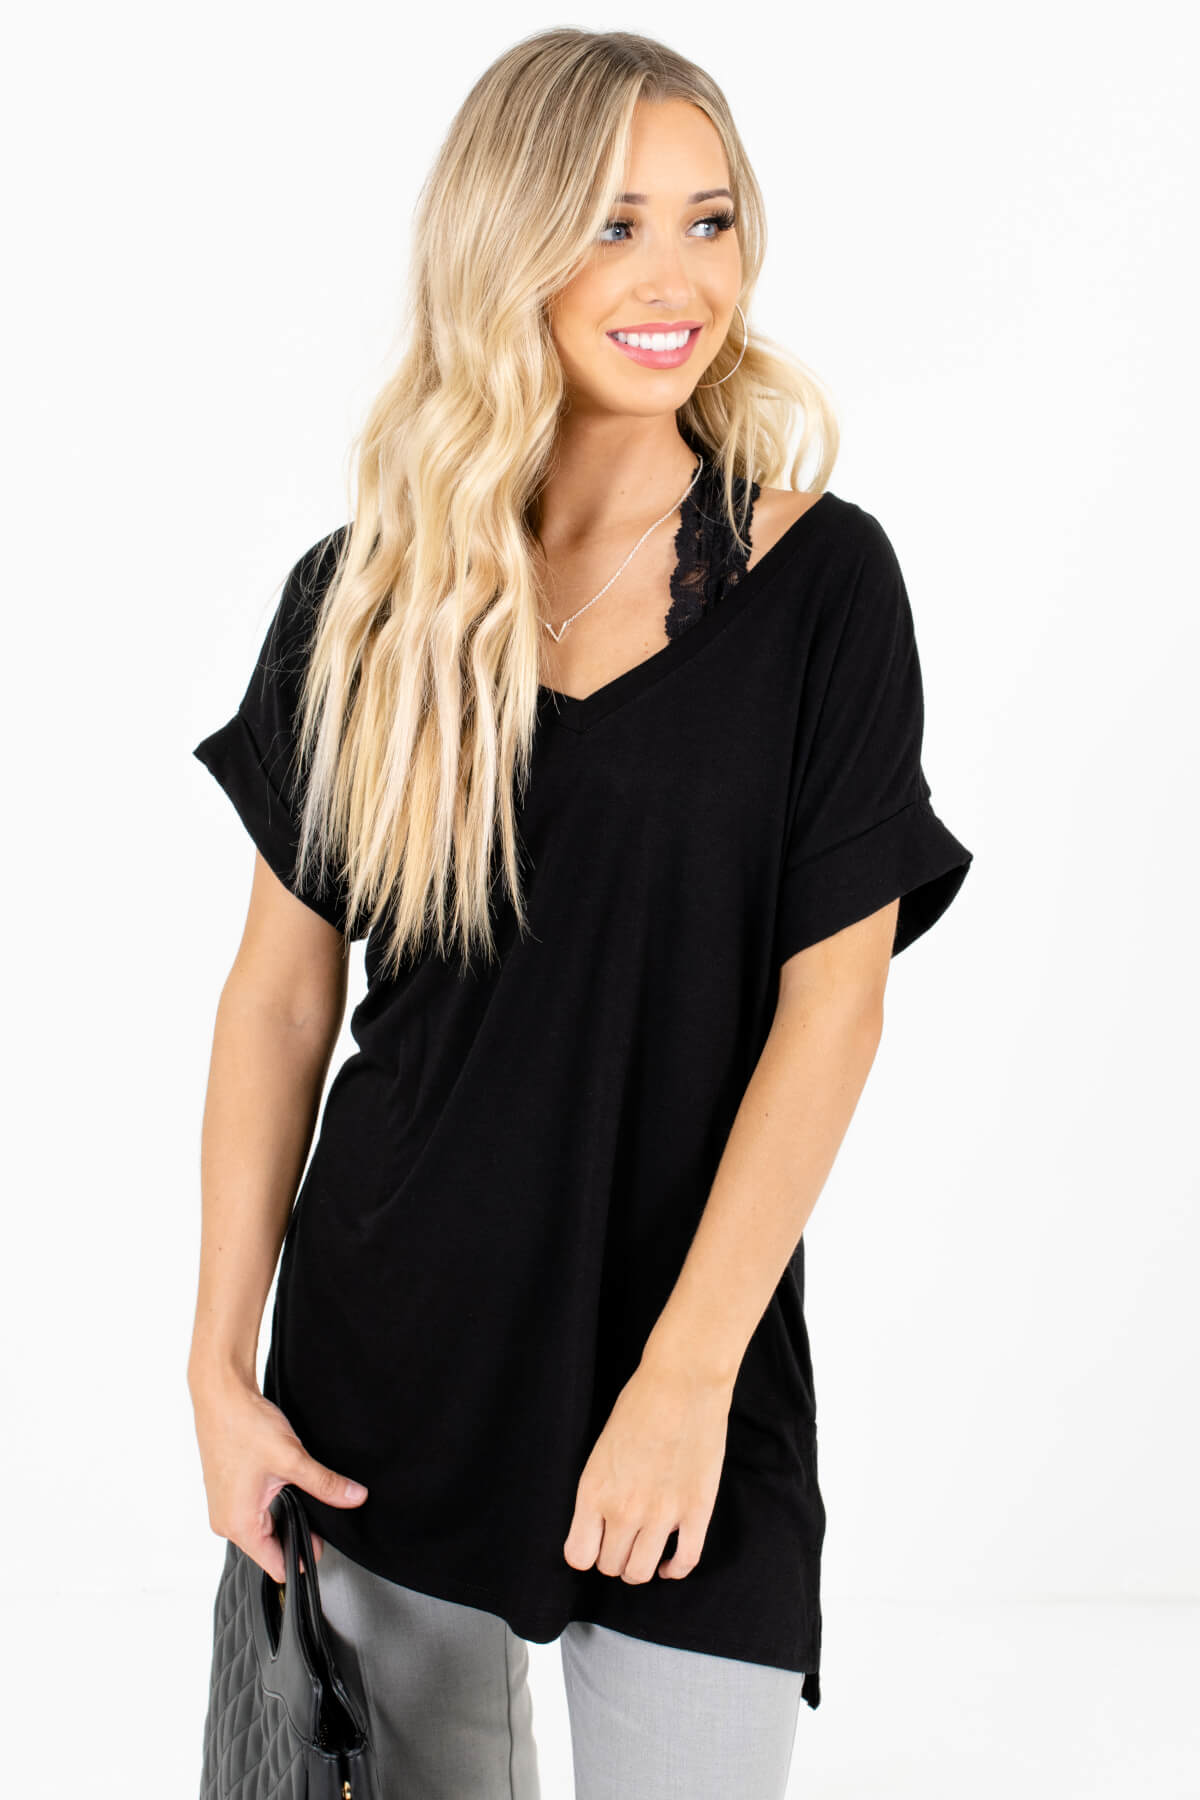 Black Lightweight Material Boutique Tops for Women